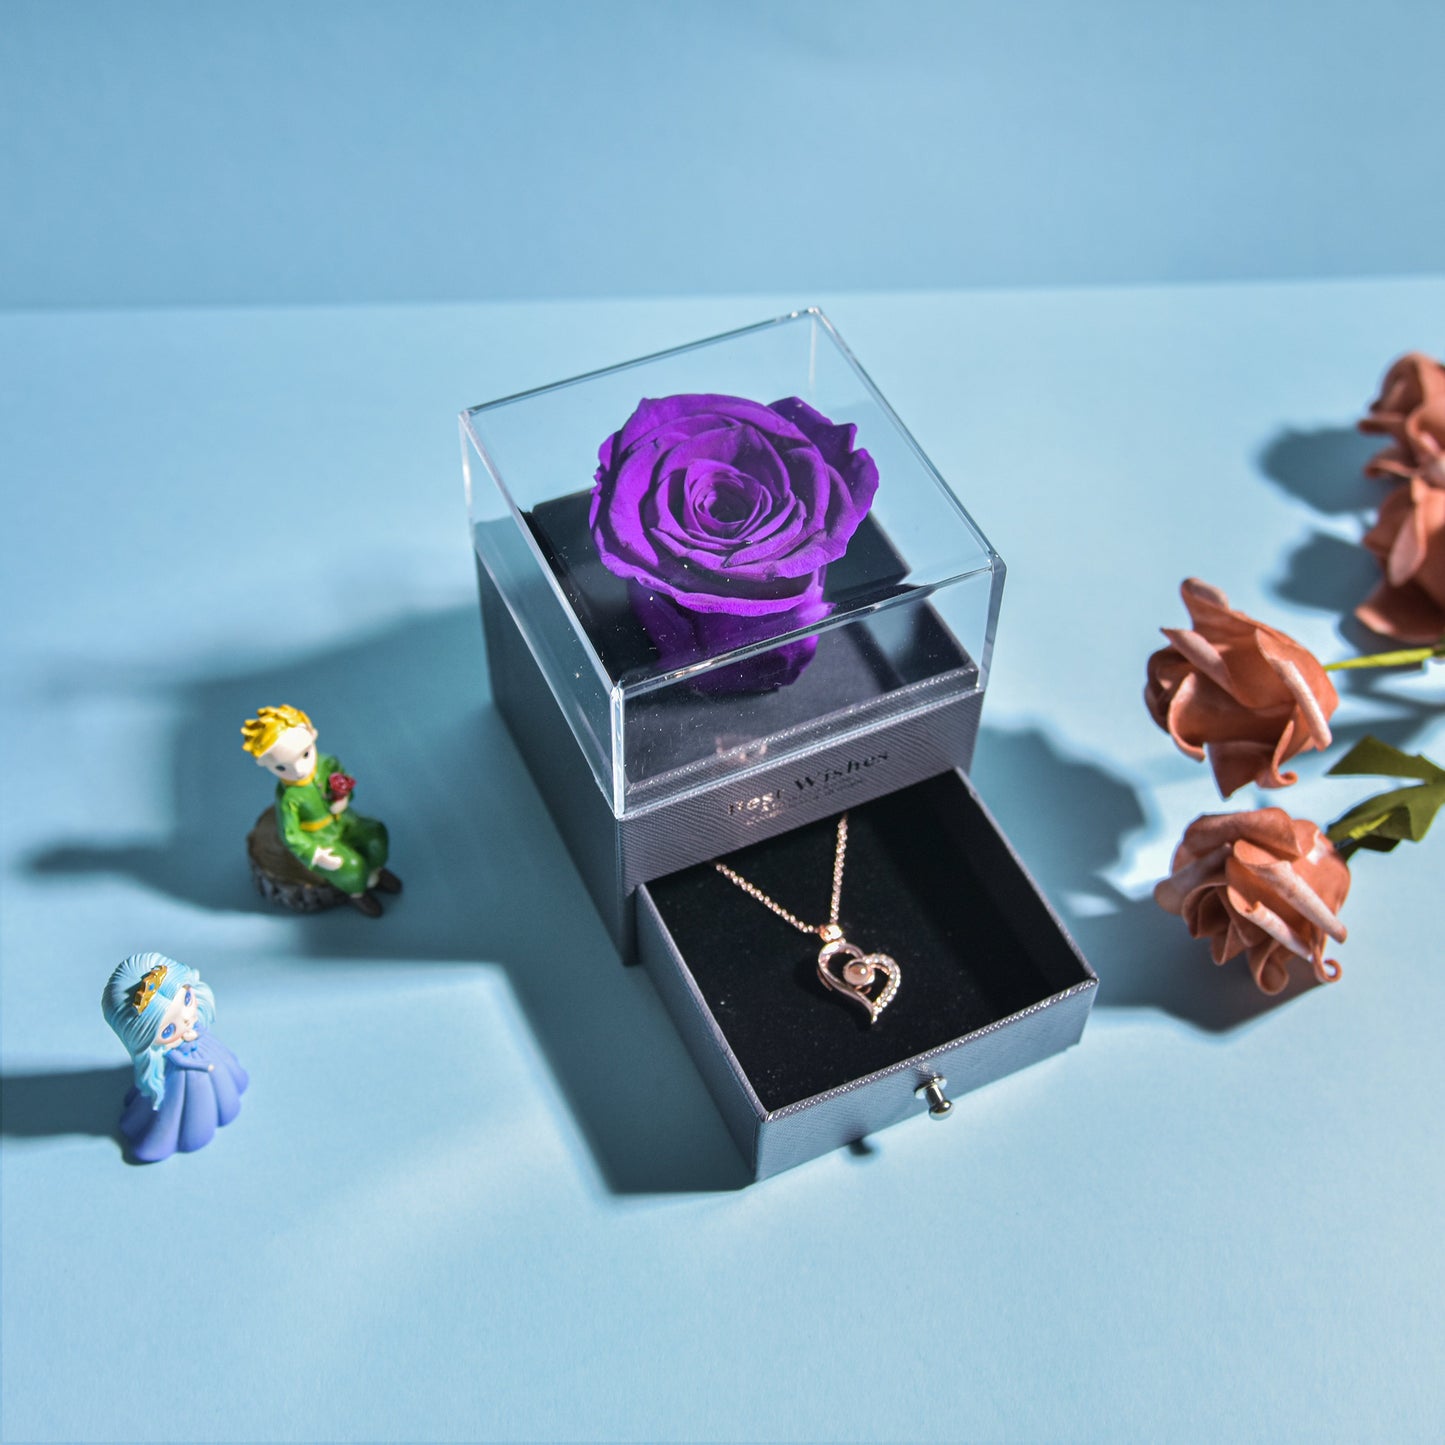 Ainyrose Jewelry Box Forever Rose-6 Colors